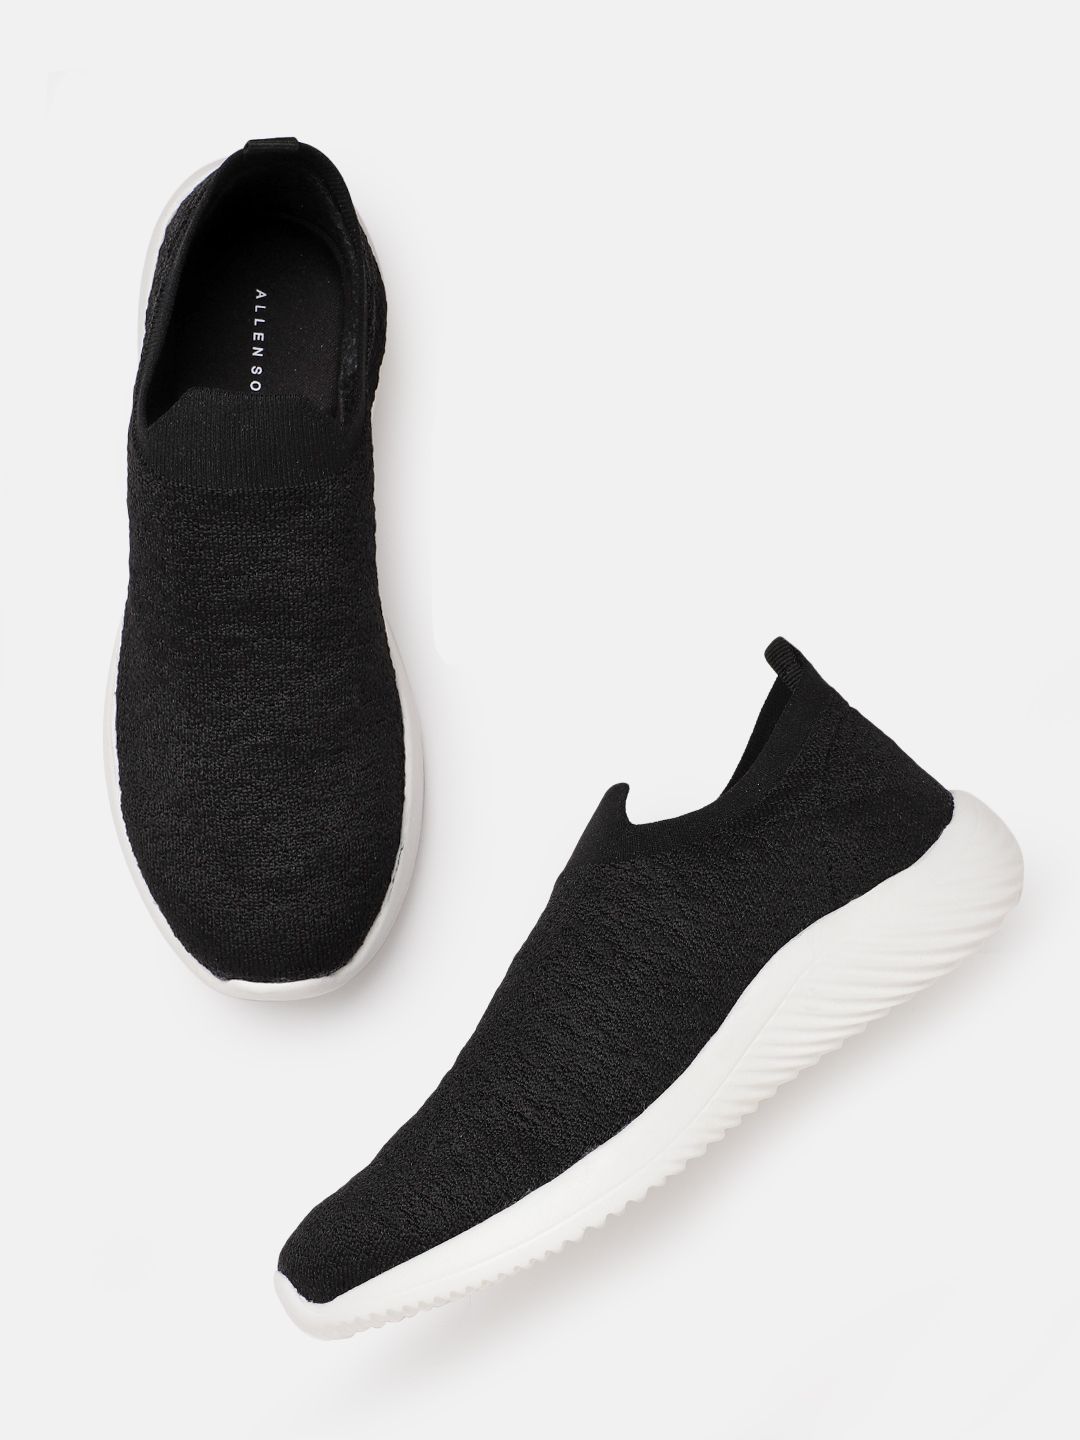 Allen Solly Women Black Knitted Slip-On Sneakers Price in India